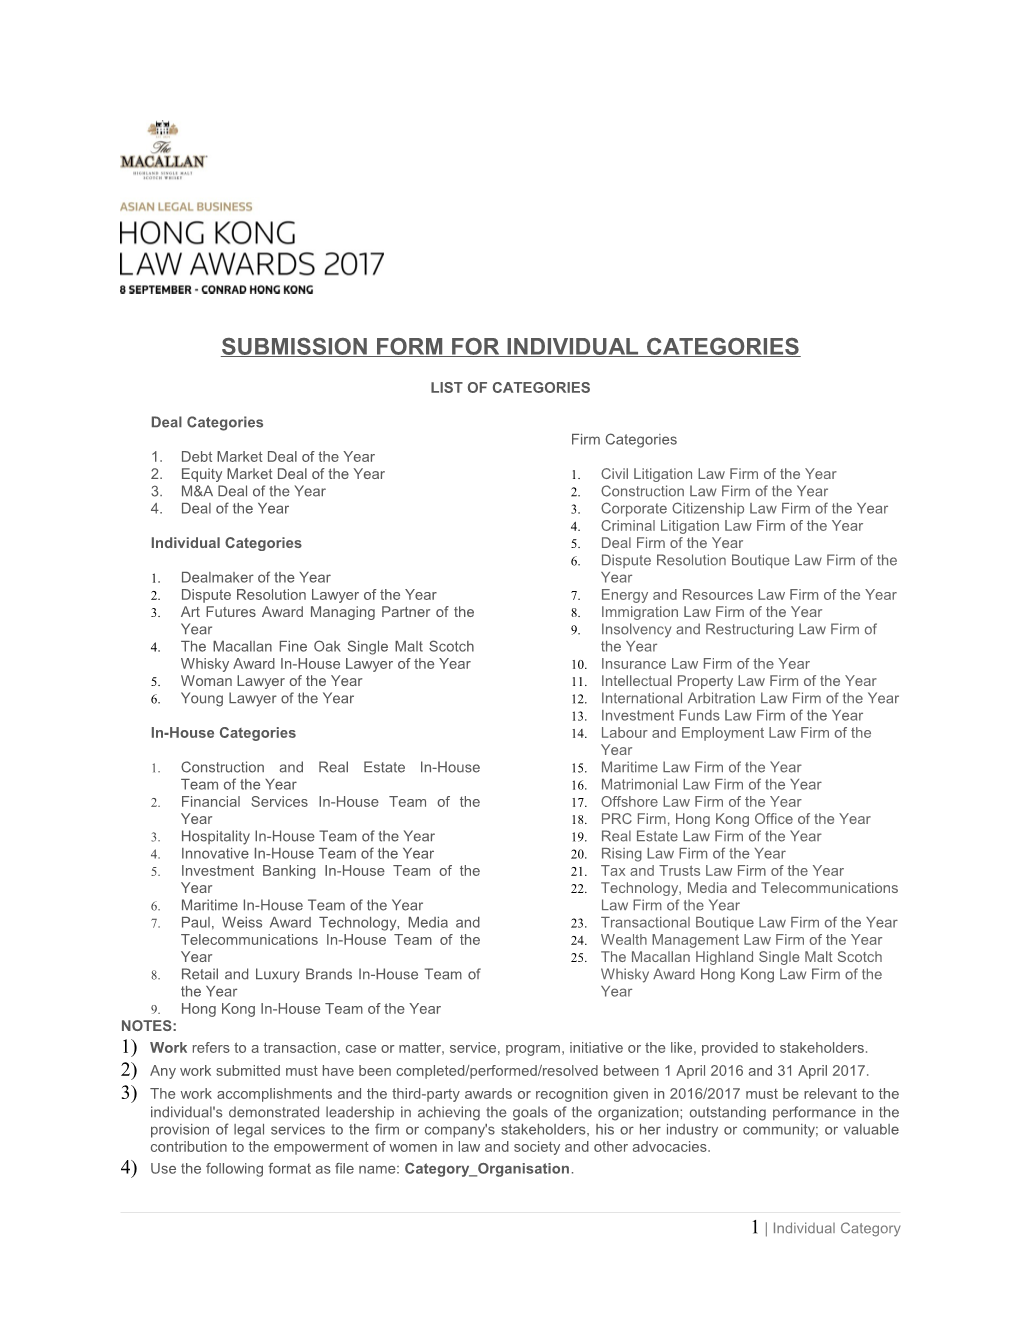 Submission Form for Individual Categories